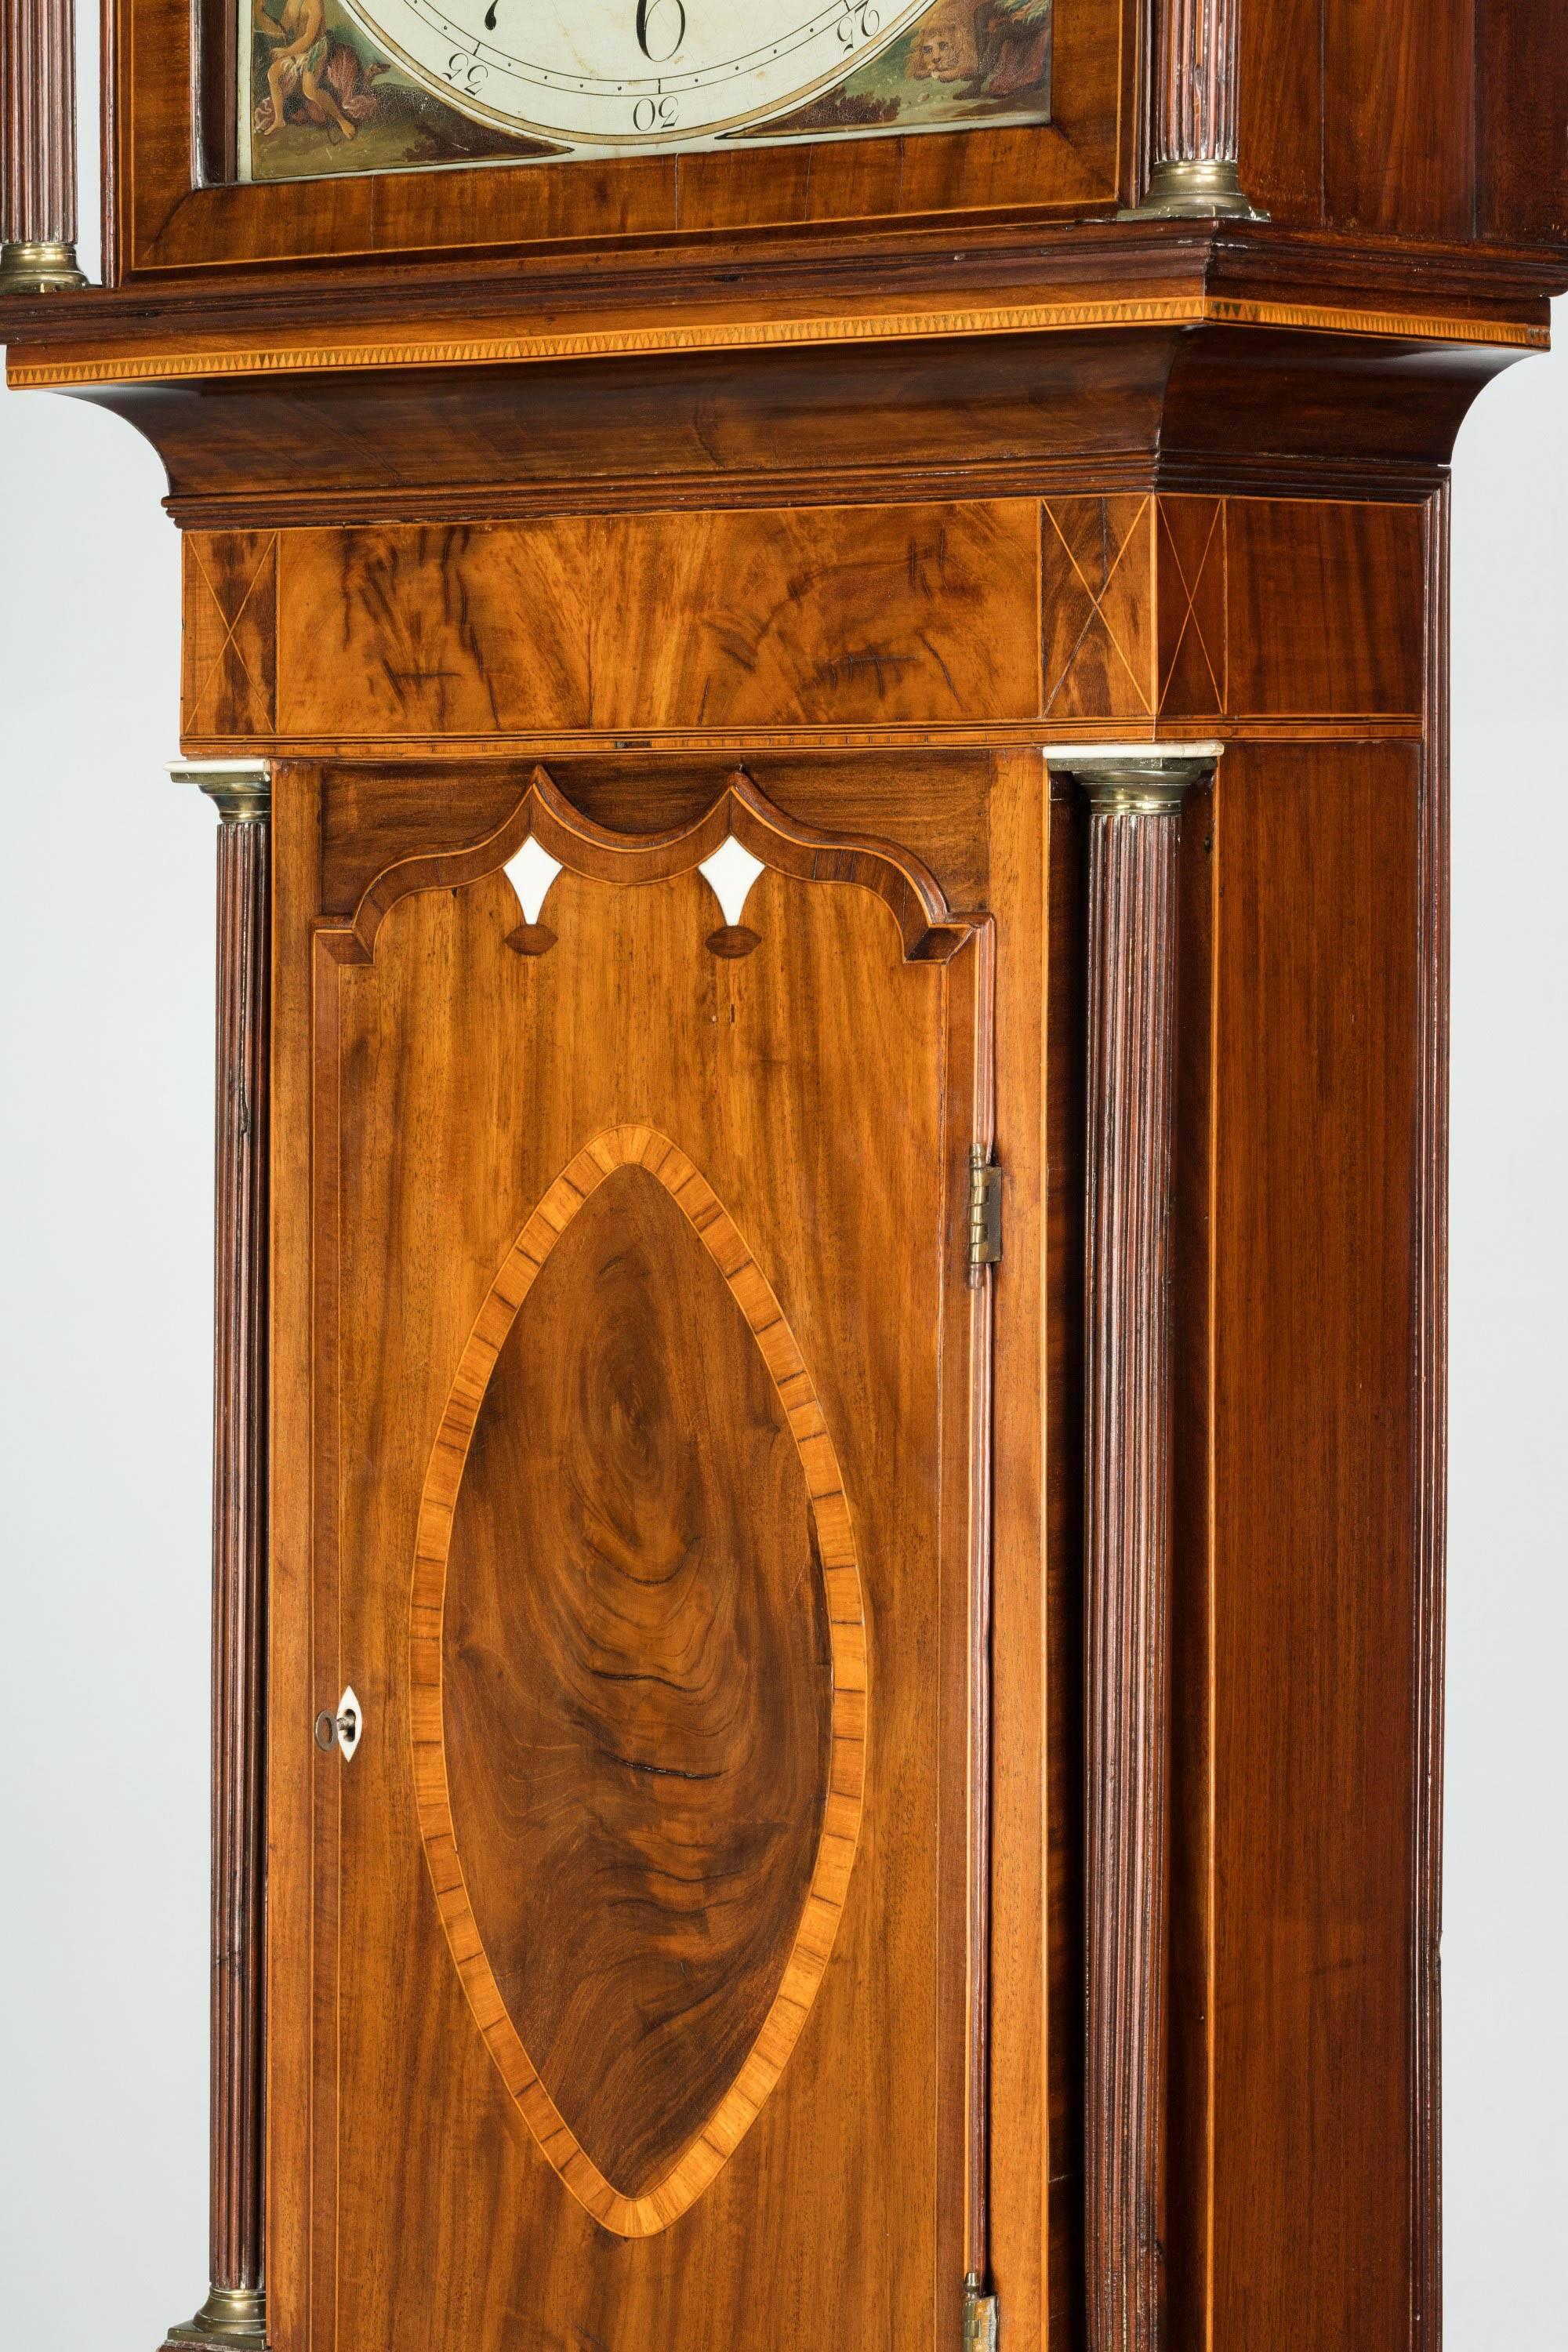 19th Century Regency Period Long-Case Clock by James Powell of Worcester